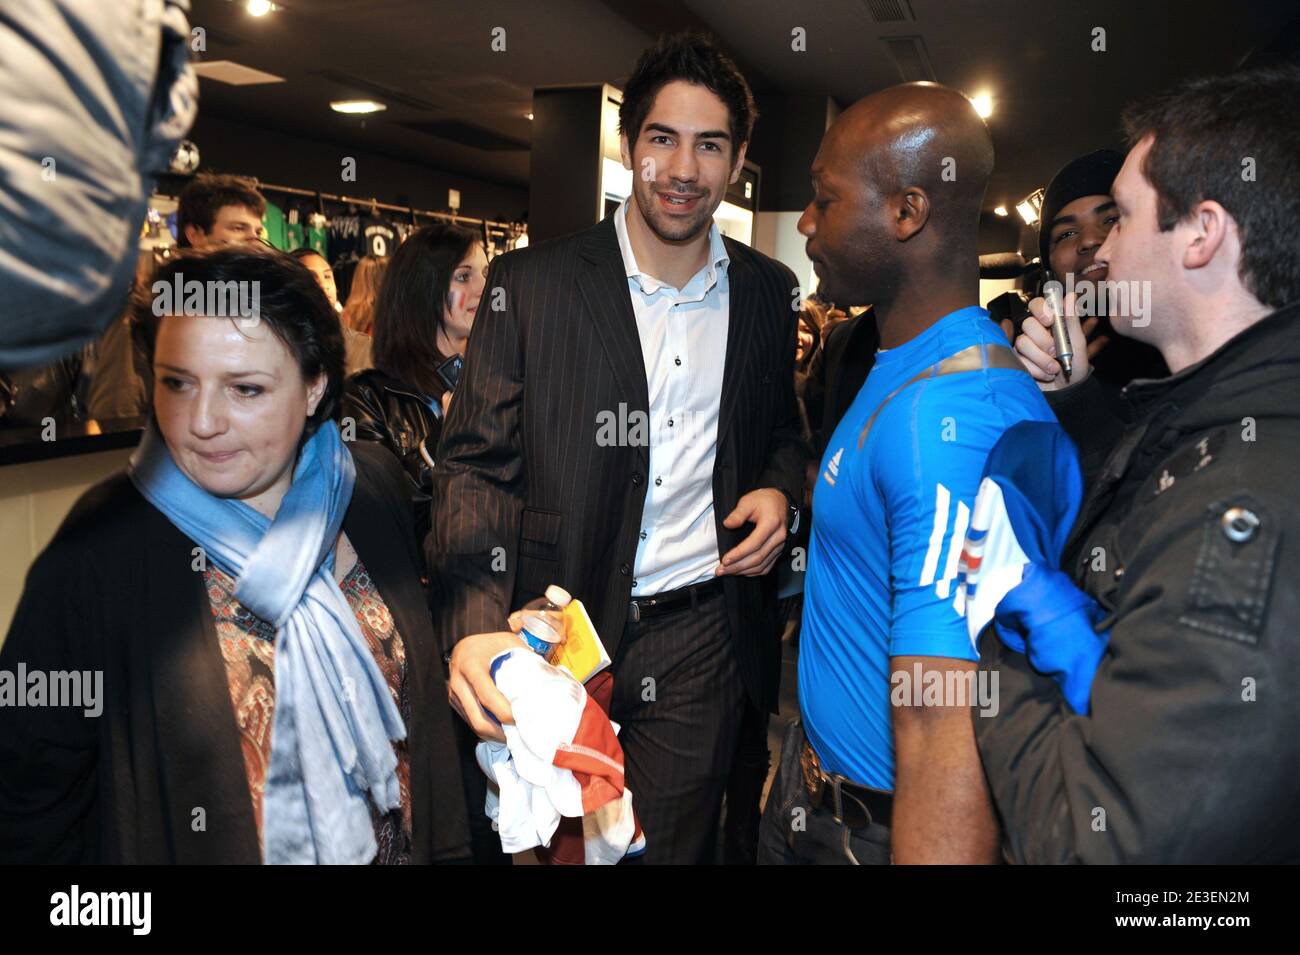 arbusto Sucio adyacente French player Nikola Karabatic at the Adidas store for a press conference,  in Paris, France on February 2d, 2009. The French national team won the  title of the 21st Men's World Handball